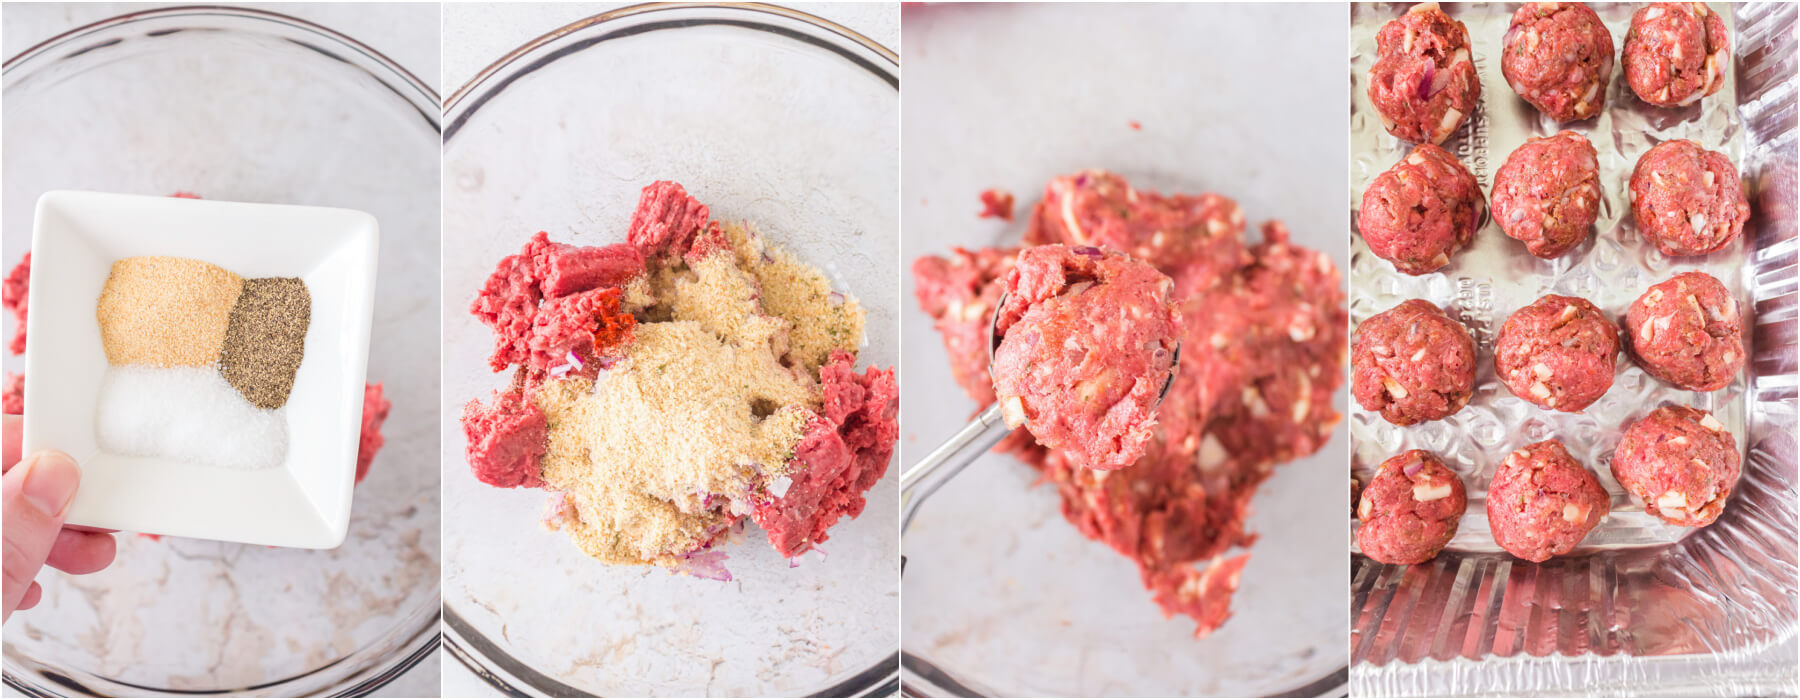 A series of photos showing how to mix up ground beef and make meatballs.